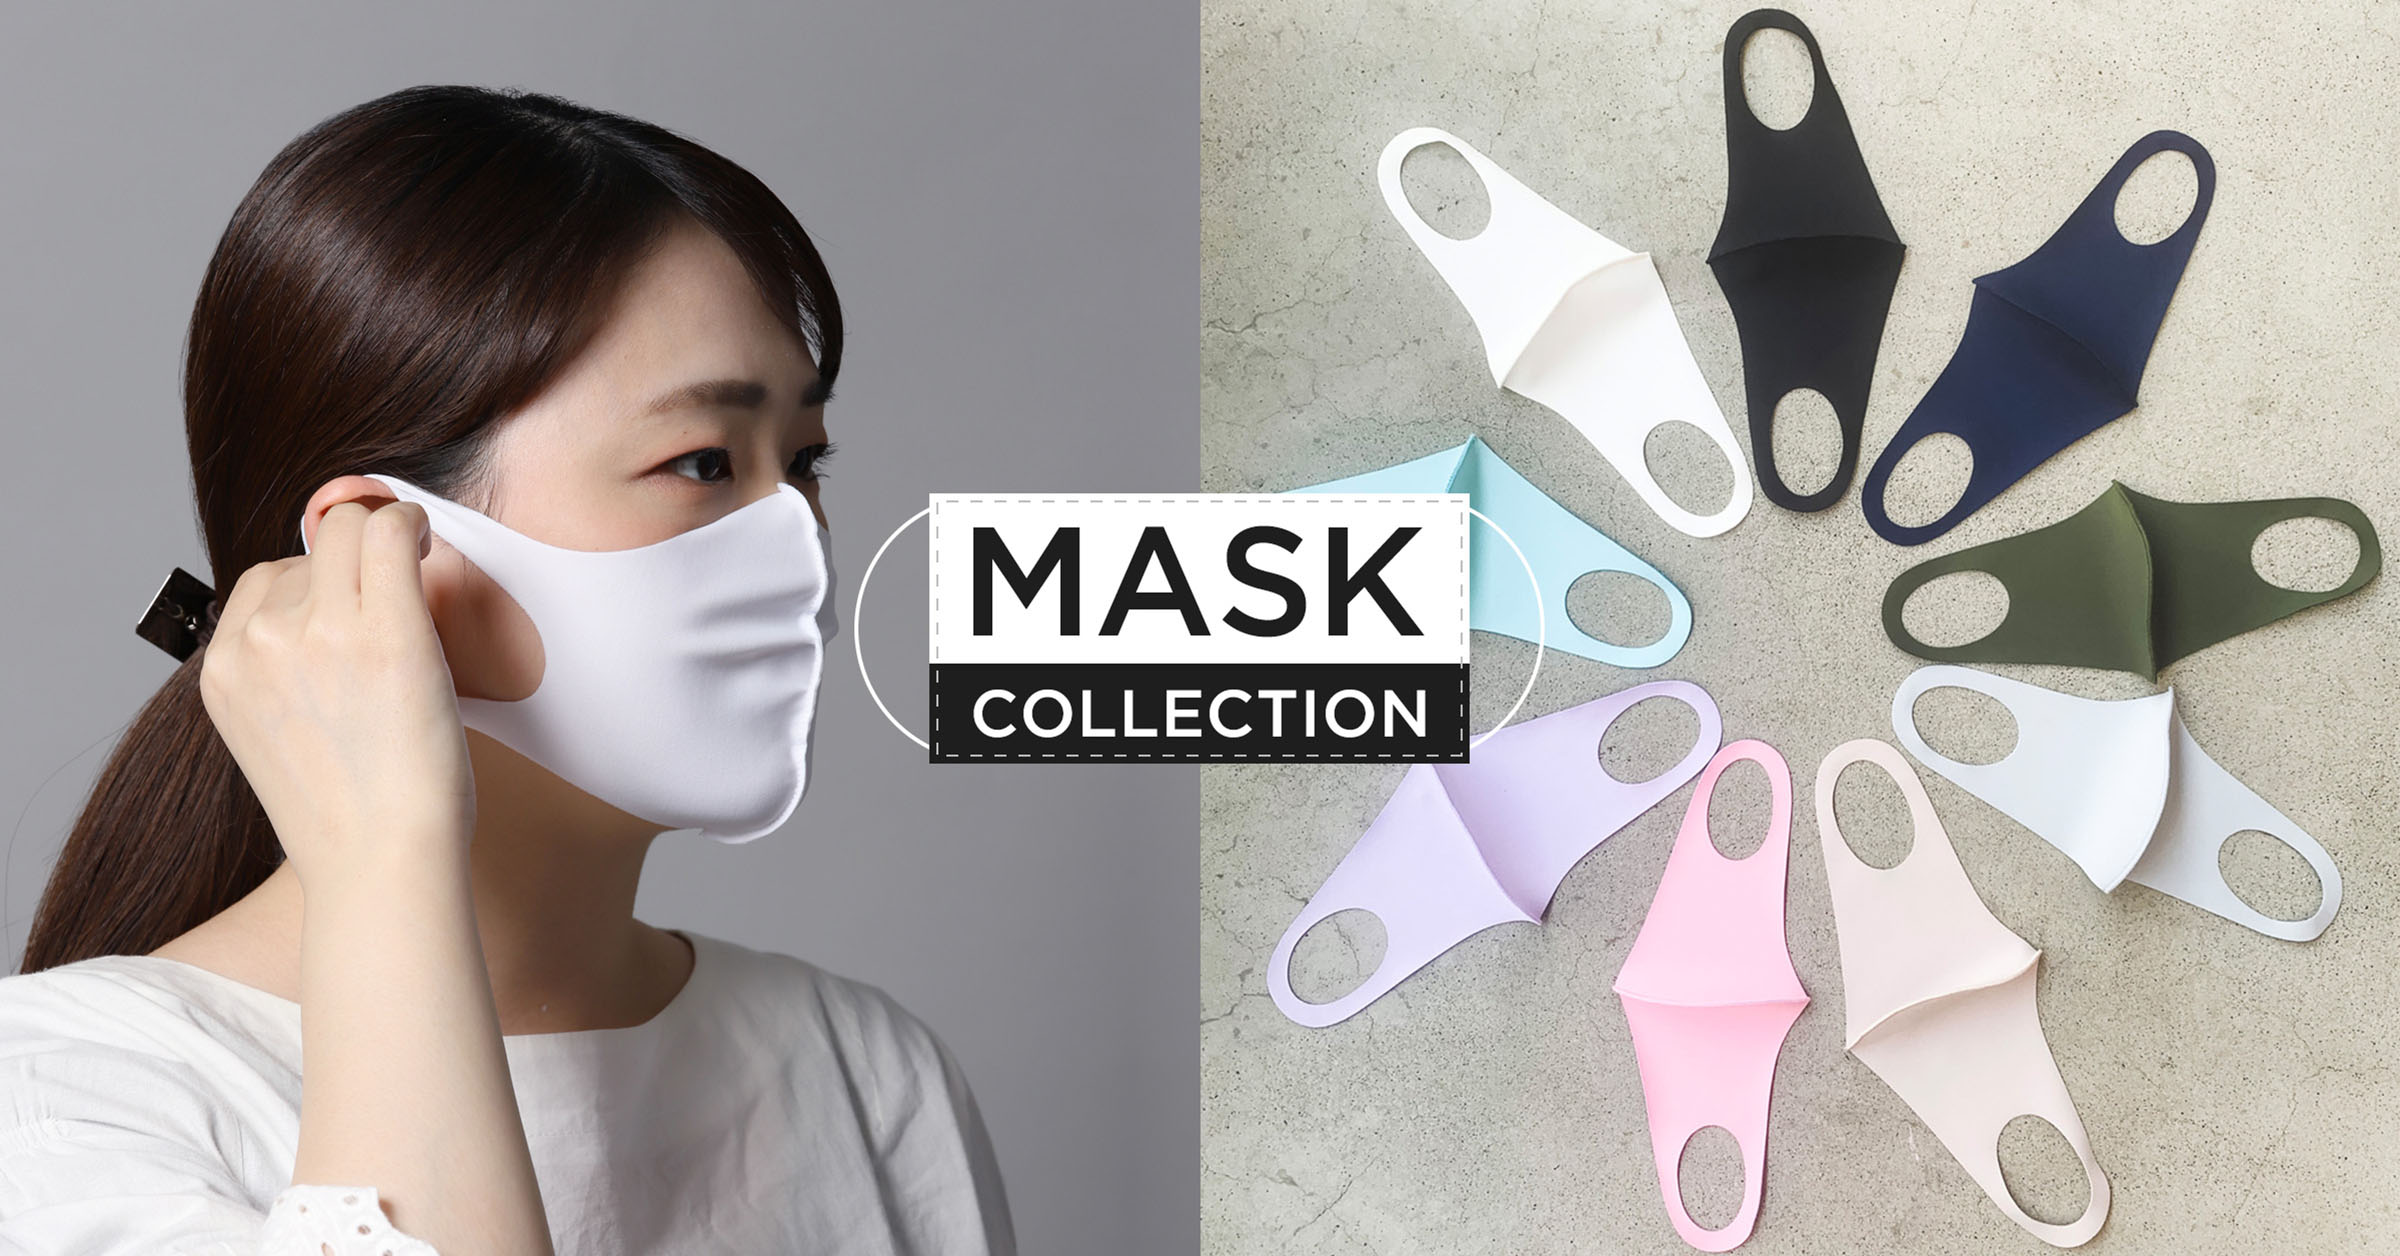 MASK COLLECTION